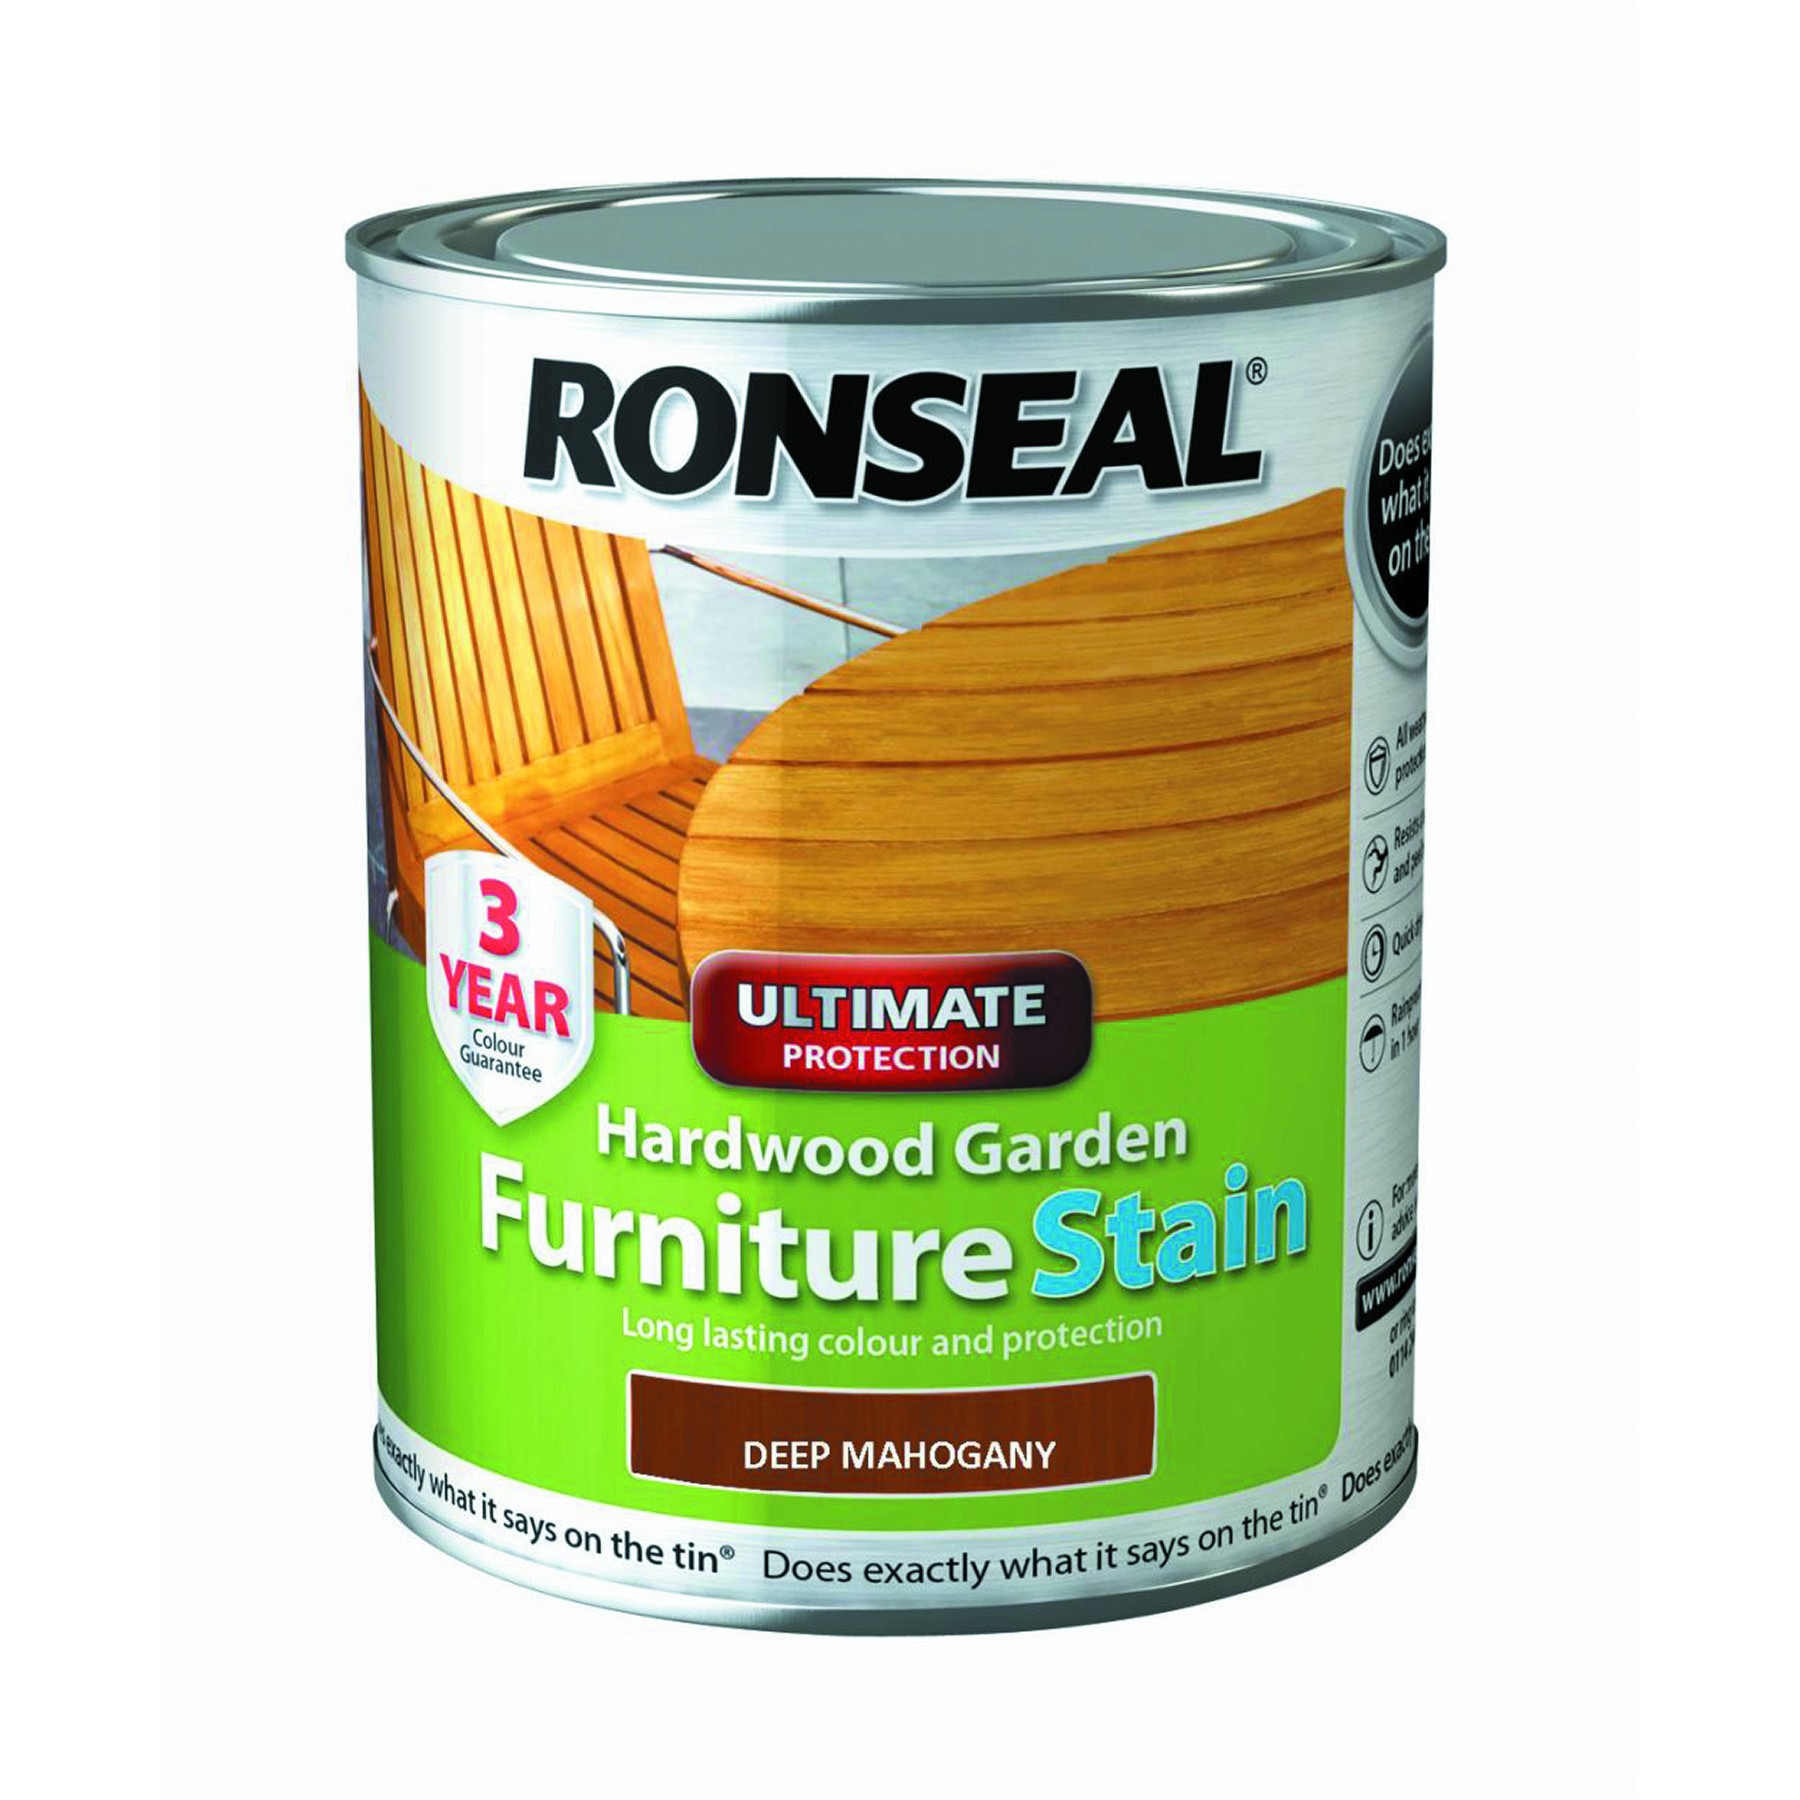 Ronseal Ultimate Protection Hardwood Garden Furniture Stain Deep Mahogany 750ml [RONS36428]